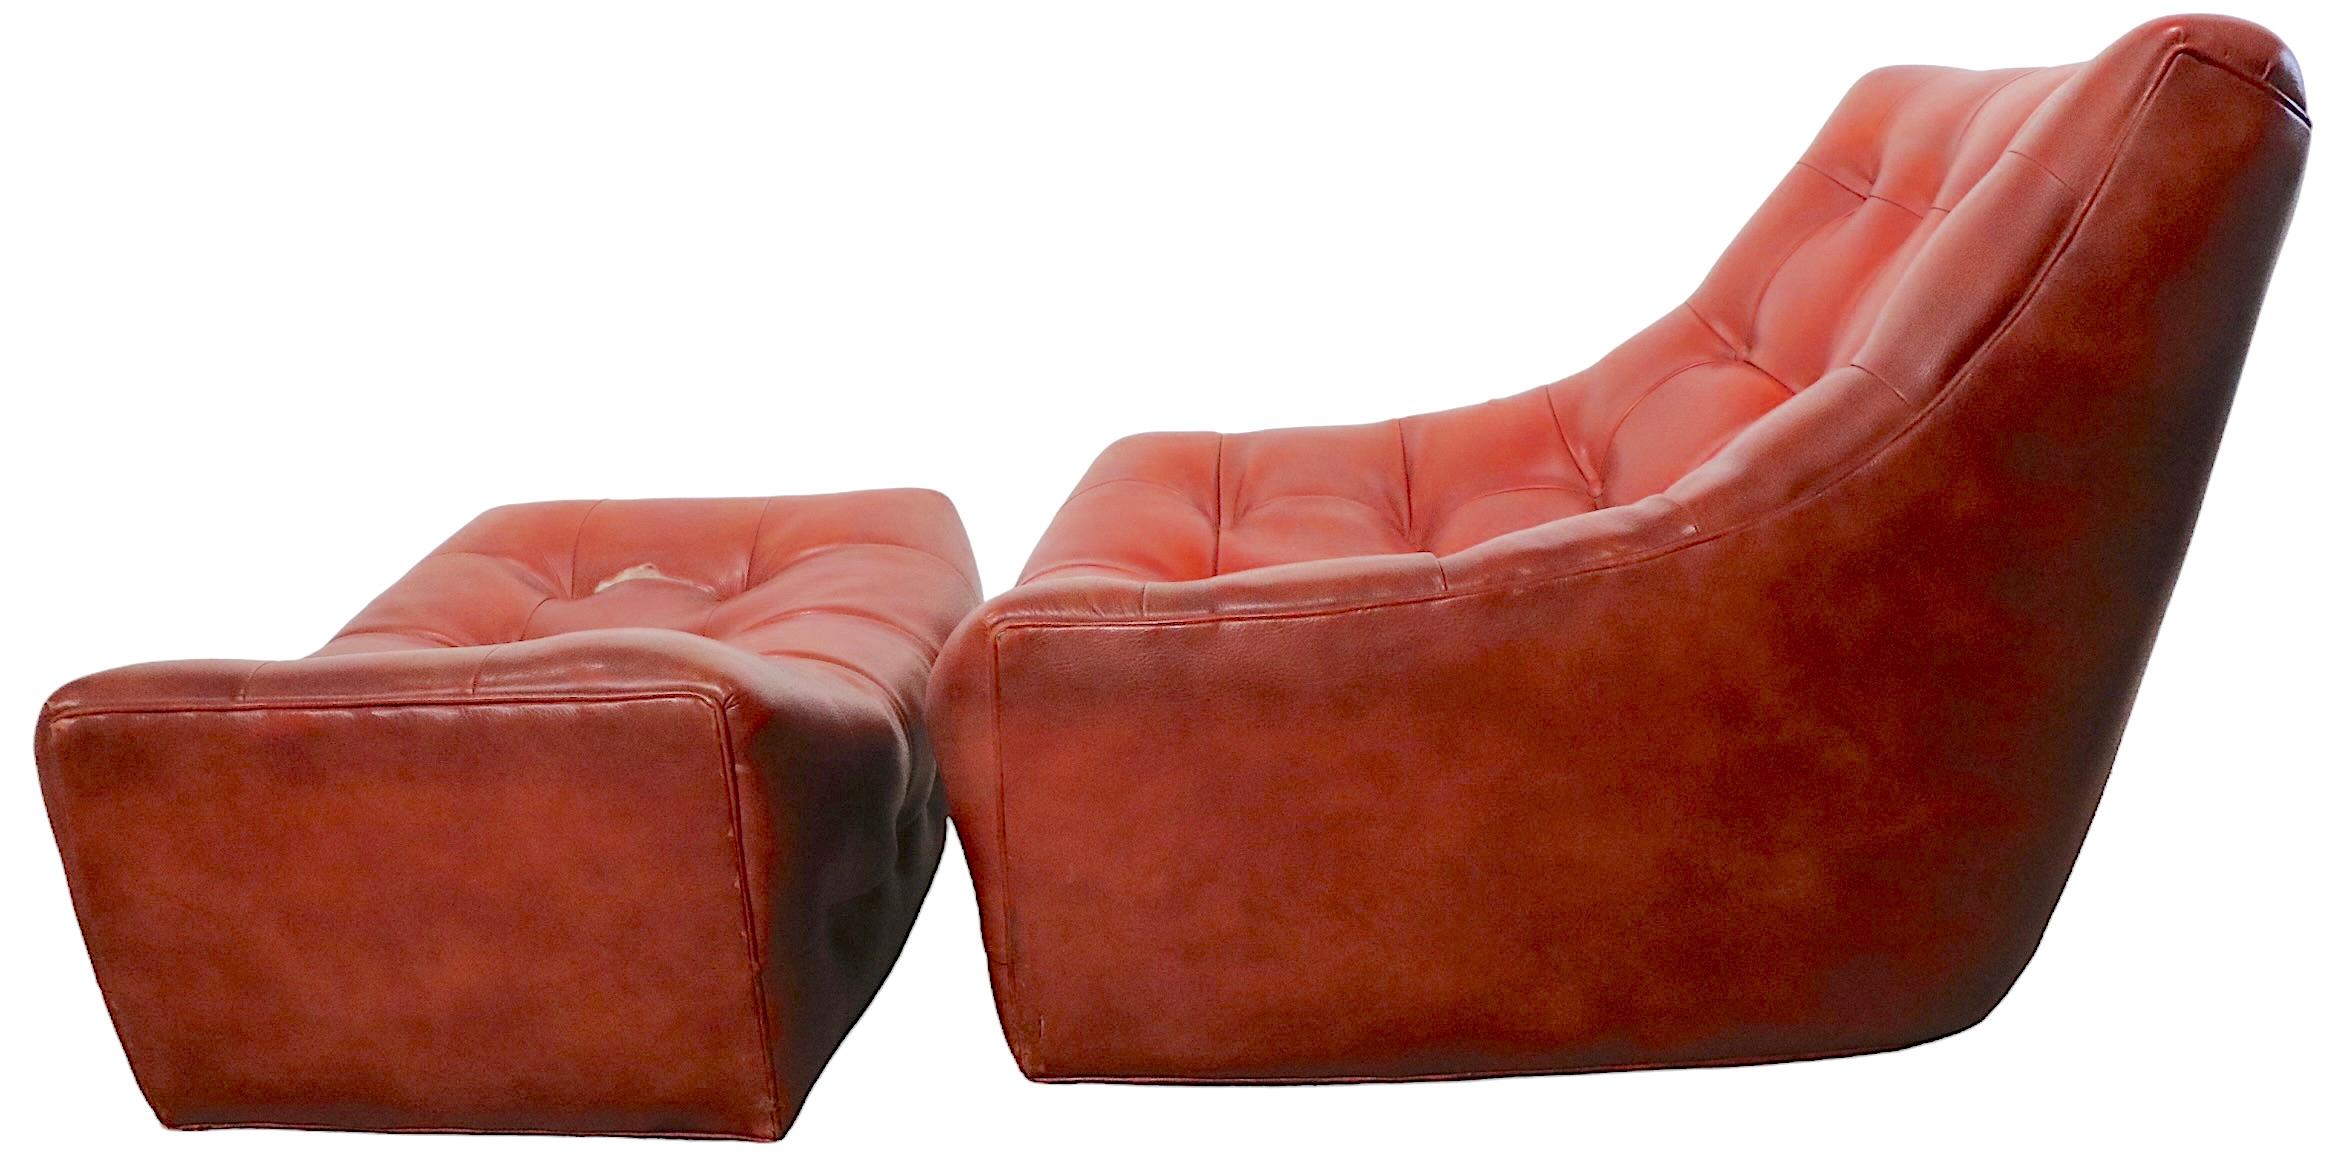 Lounge Chair and Ottoman by Milo Baughman for Thayer Coggin circa 1970s For Sale 5